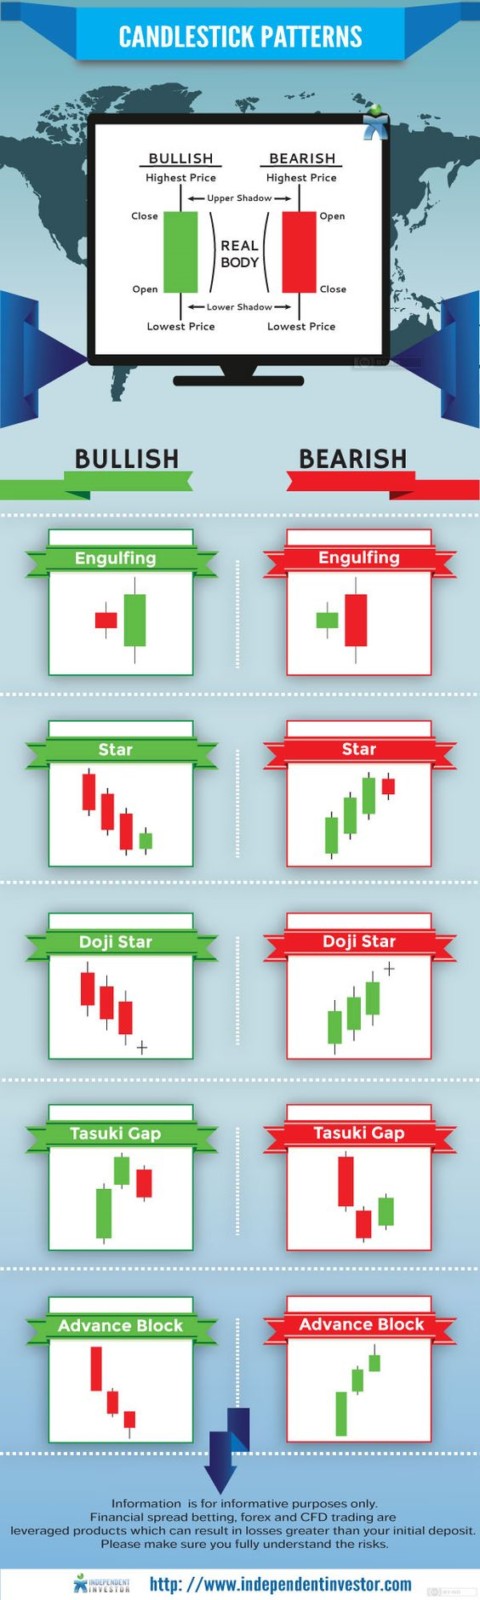 Understanding Candlestick Patterns in Crypto Trading